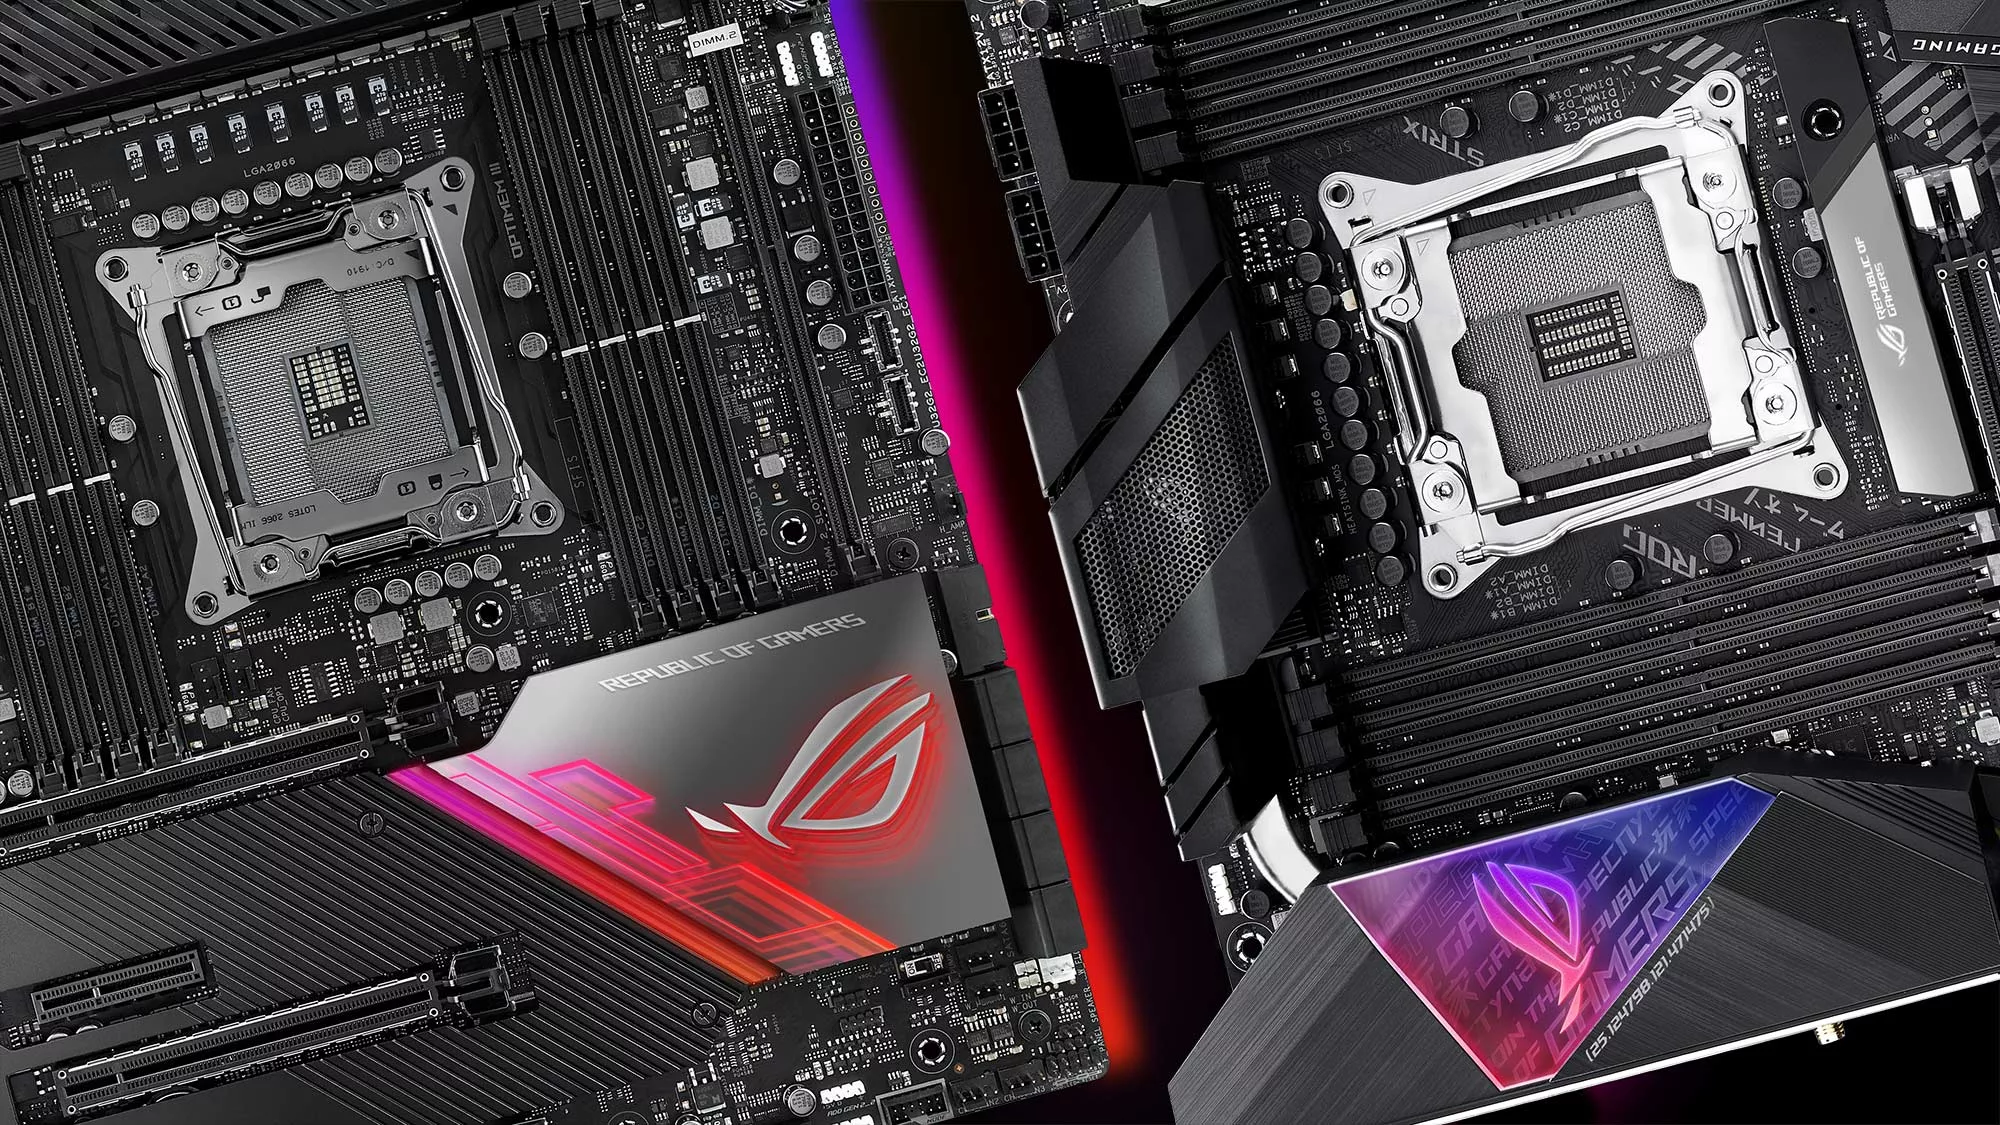 Refreshed ROG X299 motherboards are ready to push your Intel Core X-series  CPU to the limit | ROG - Republic of Gamers Global